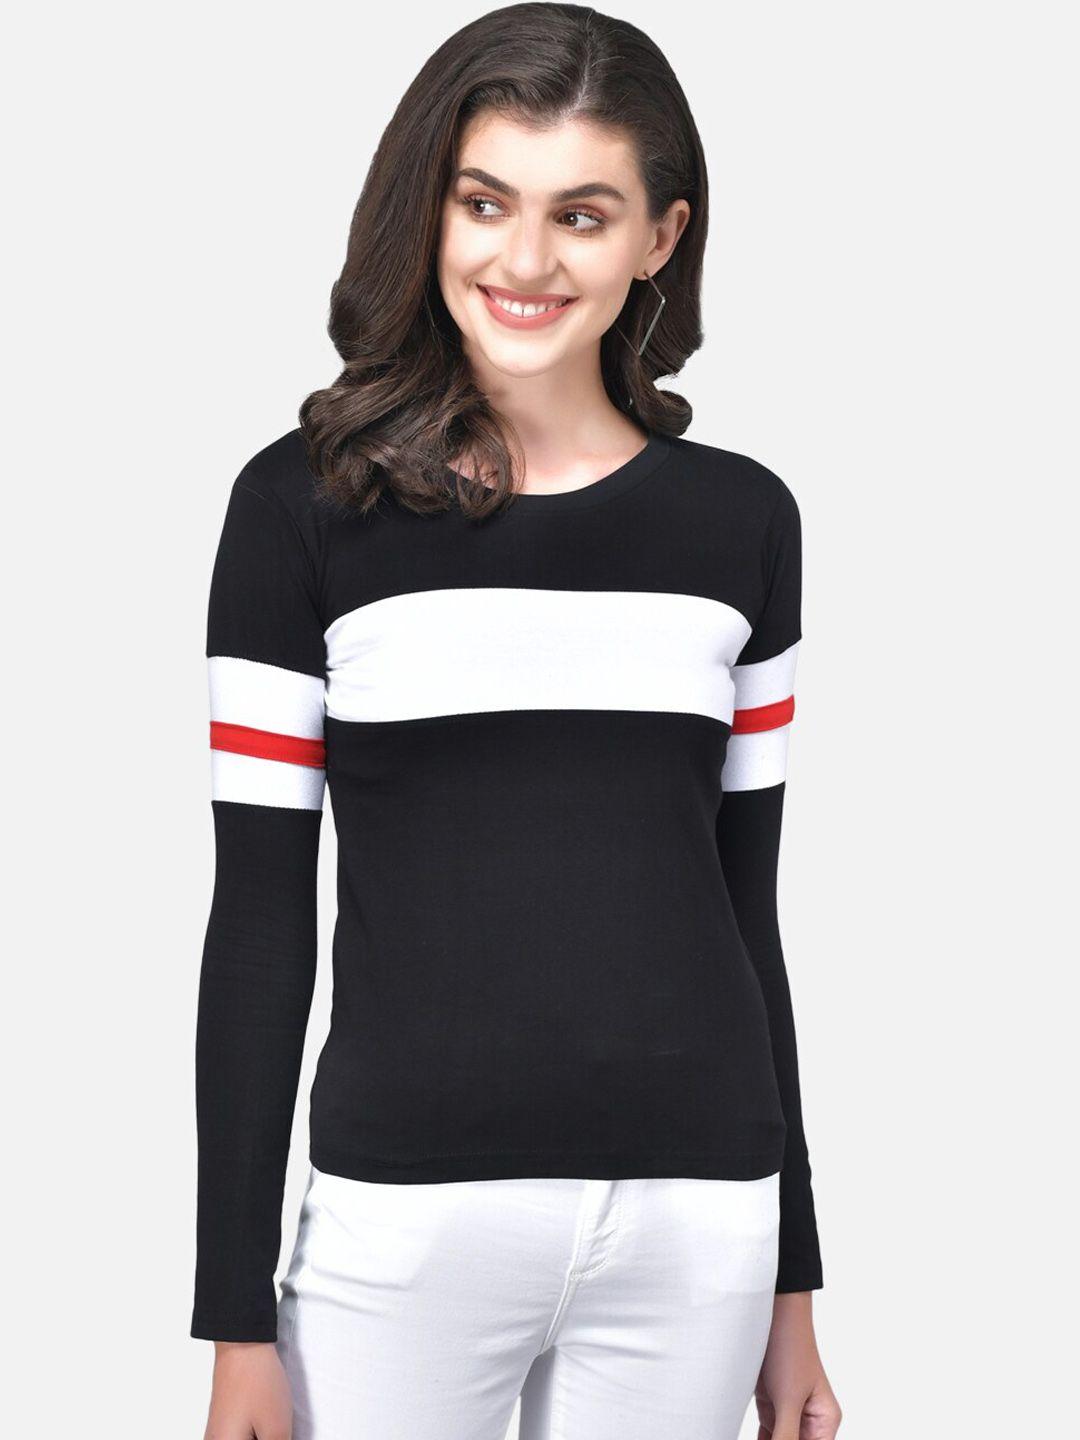 the dry state women black & white colorblocked round neck tshirt